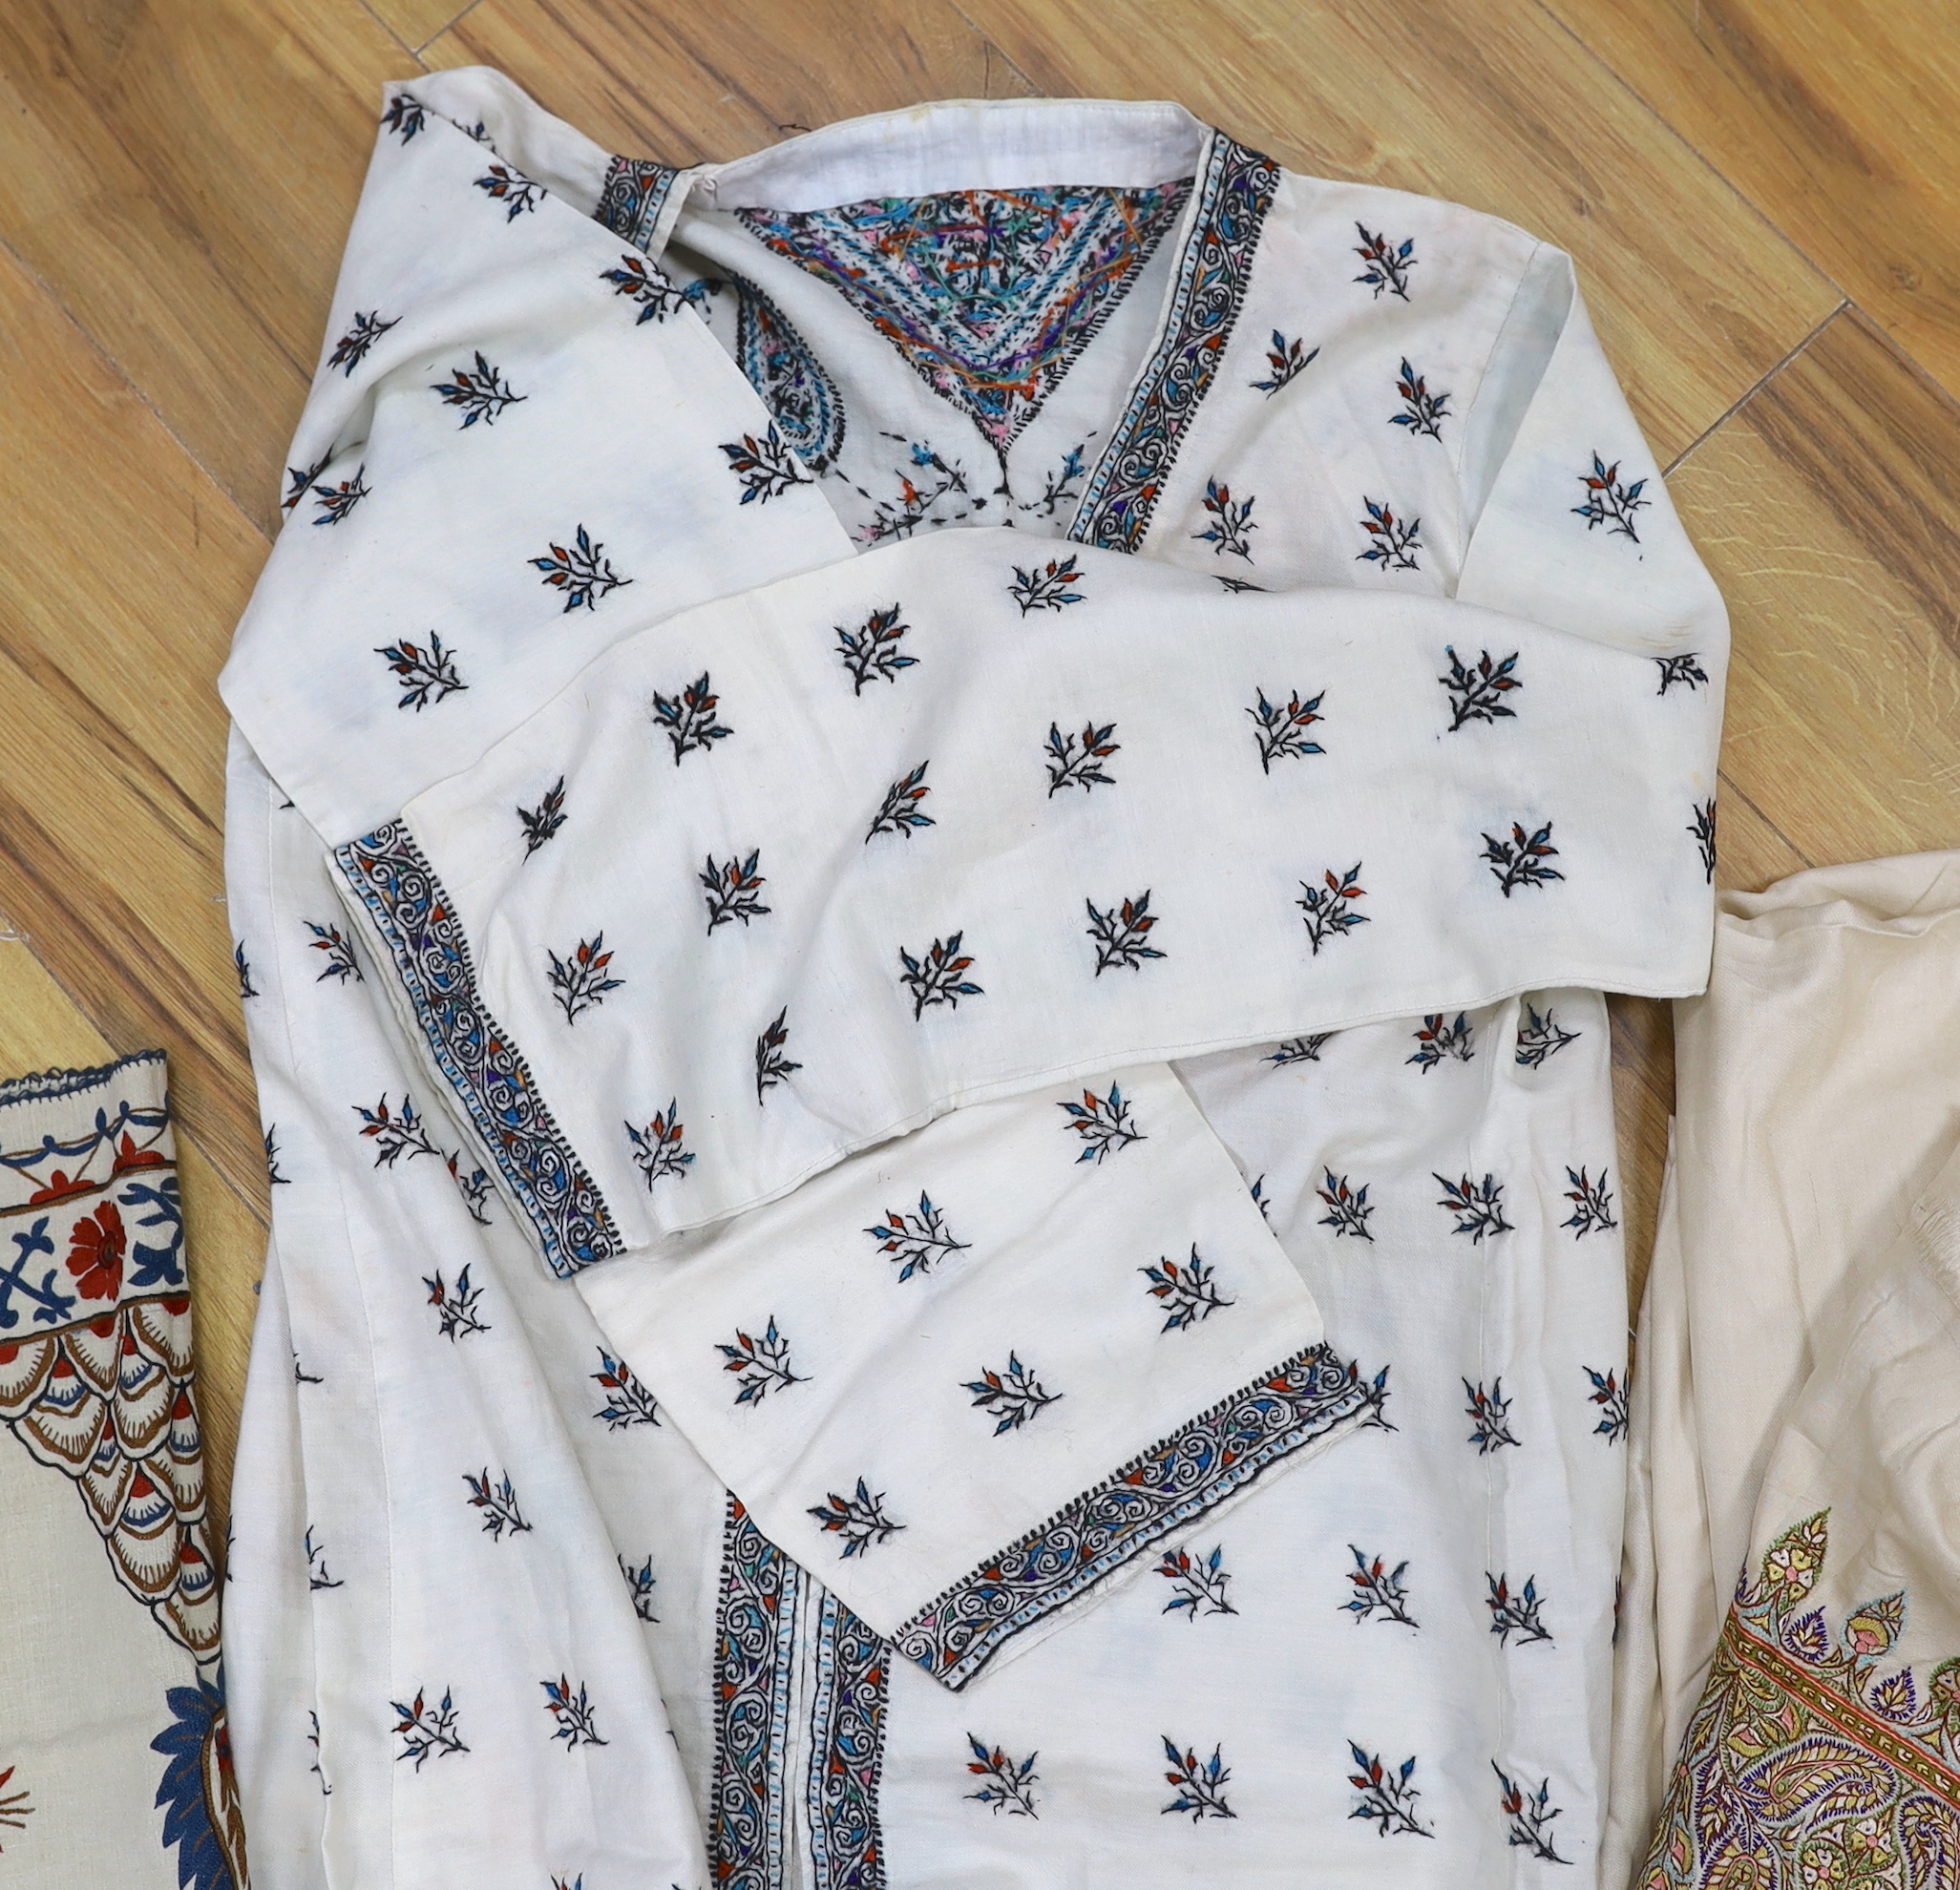 An Indian embroidered sari, similar robe Suzani style embroidered coat